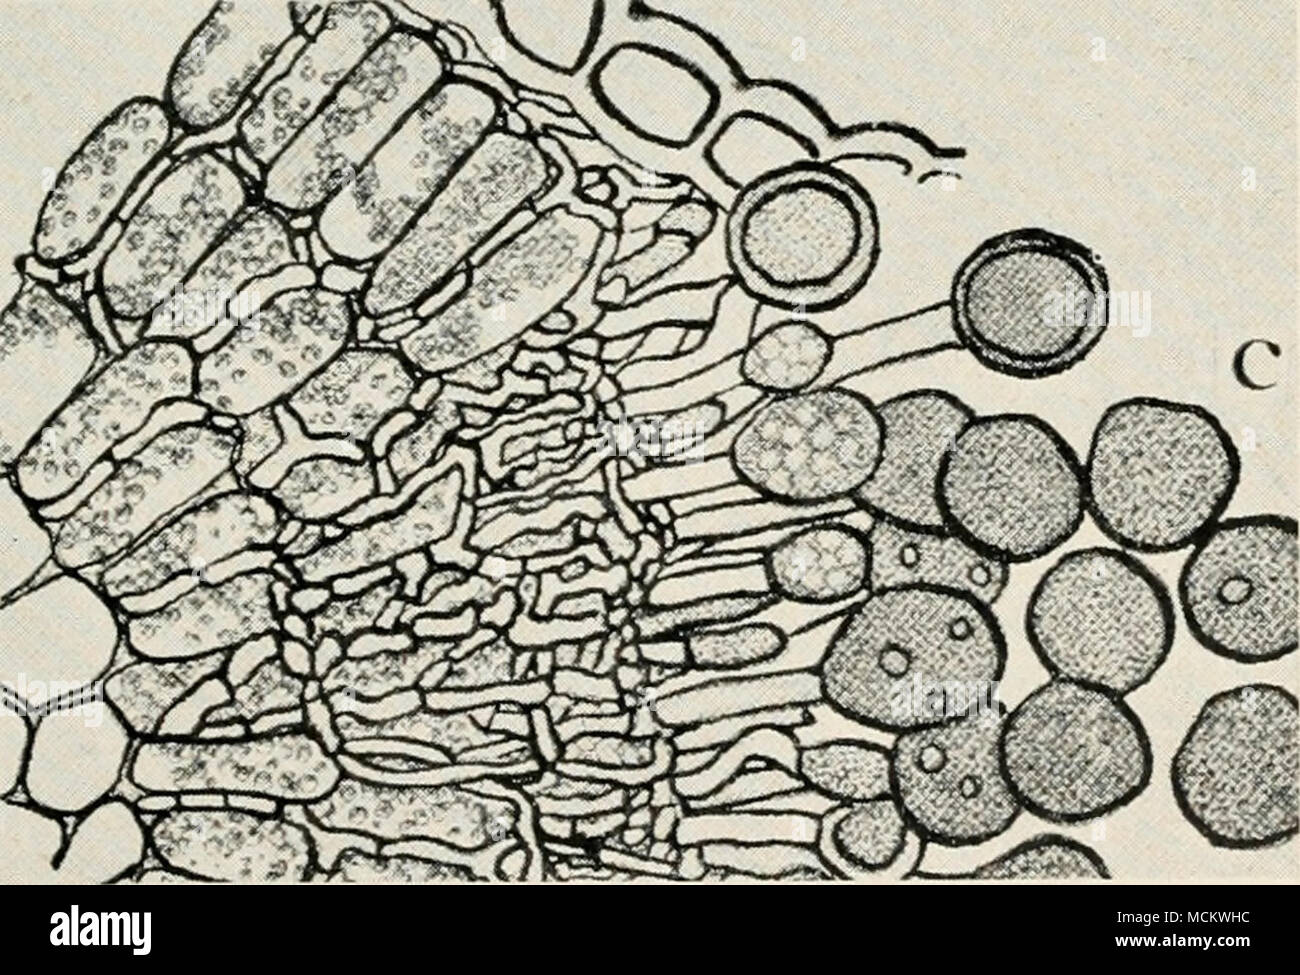 . Fig. 52. Asparagus Diseases. a. Asparagus rust on stems, showing sori with winter spores, b. cluster cup stage of Puccinia asparagi, c. Uredo or summer spores of P. asparagi, d. Teleuto or winter spores of P. asparagi (6. to d. after R. E. Smith). Stock Photo